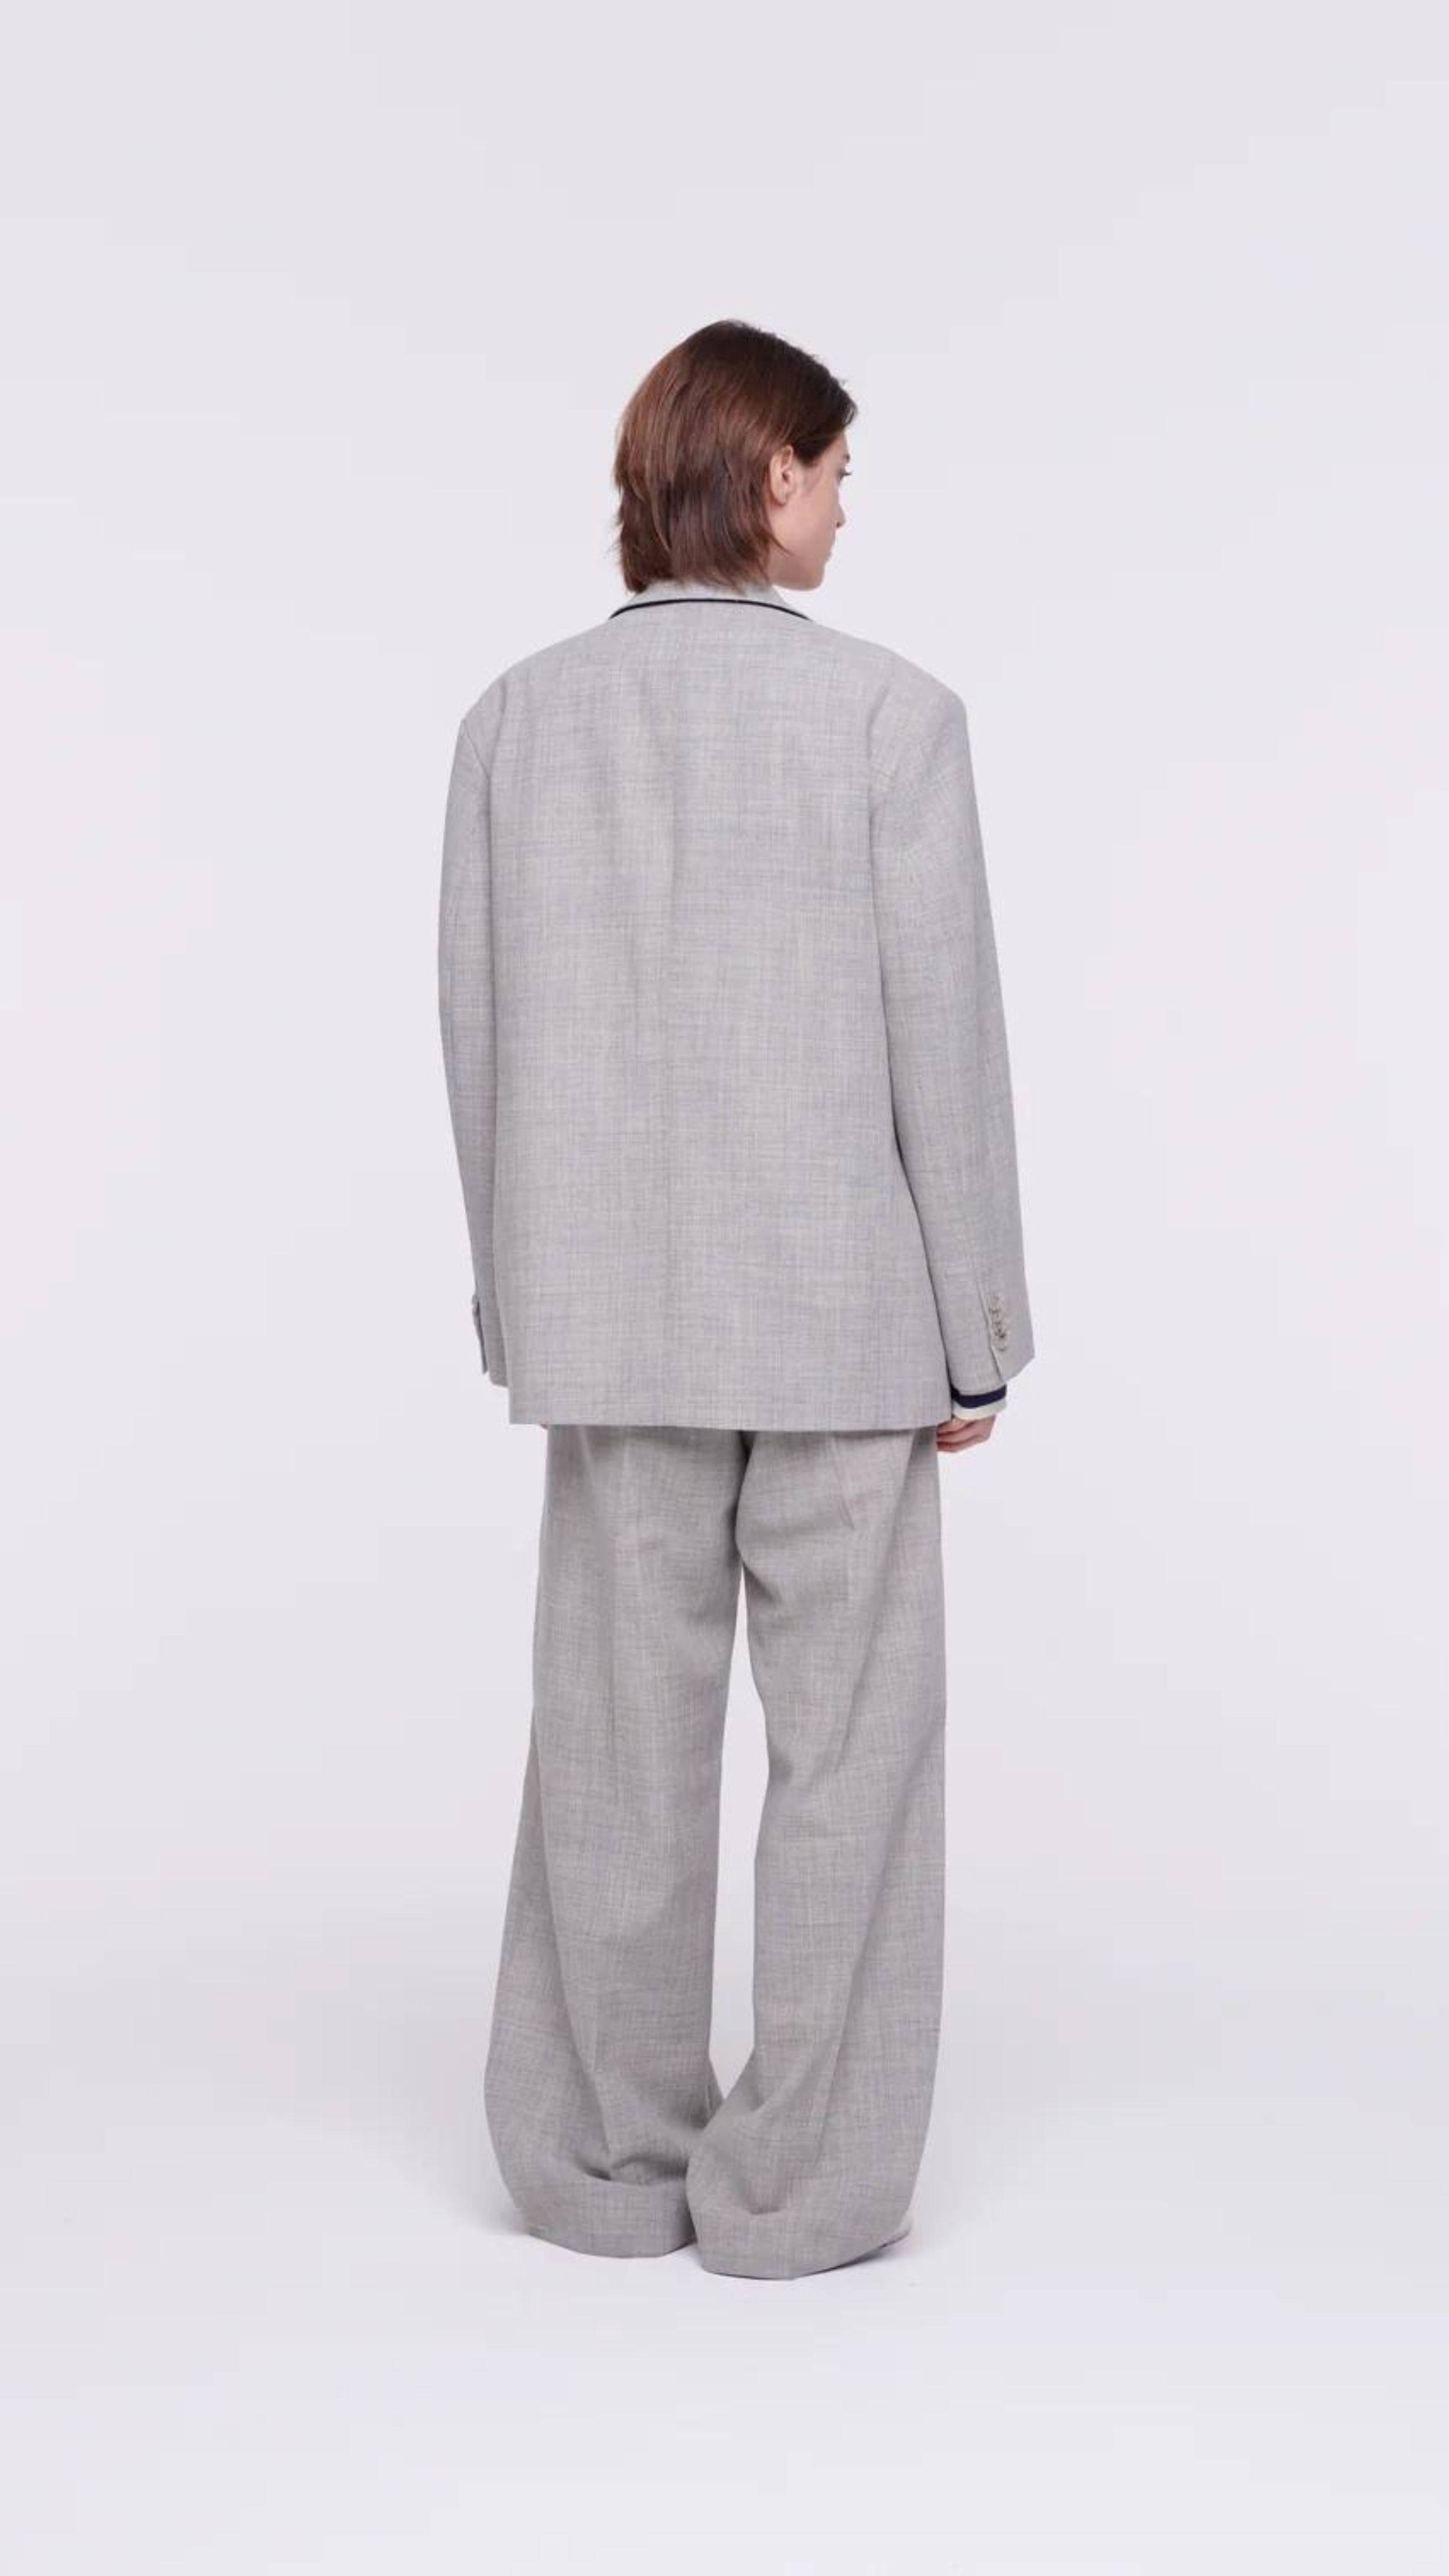 Plan C Pleated Melange Wide Leg Pants. tailored-cut and high-rise fit and wide leg trouser. With double pleating, button fastening closure, and pockets. Made in Italy from a light weight grey melange wool panama weave. Photo shown on model from the back.